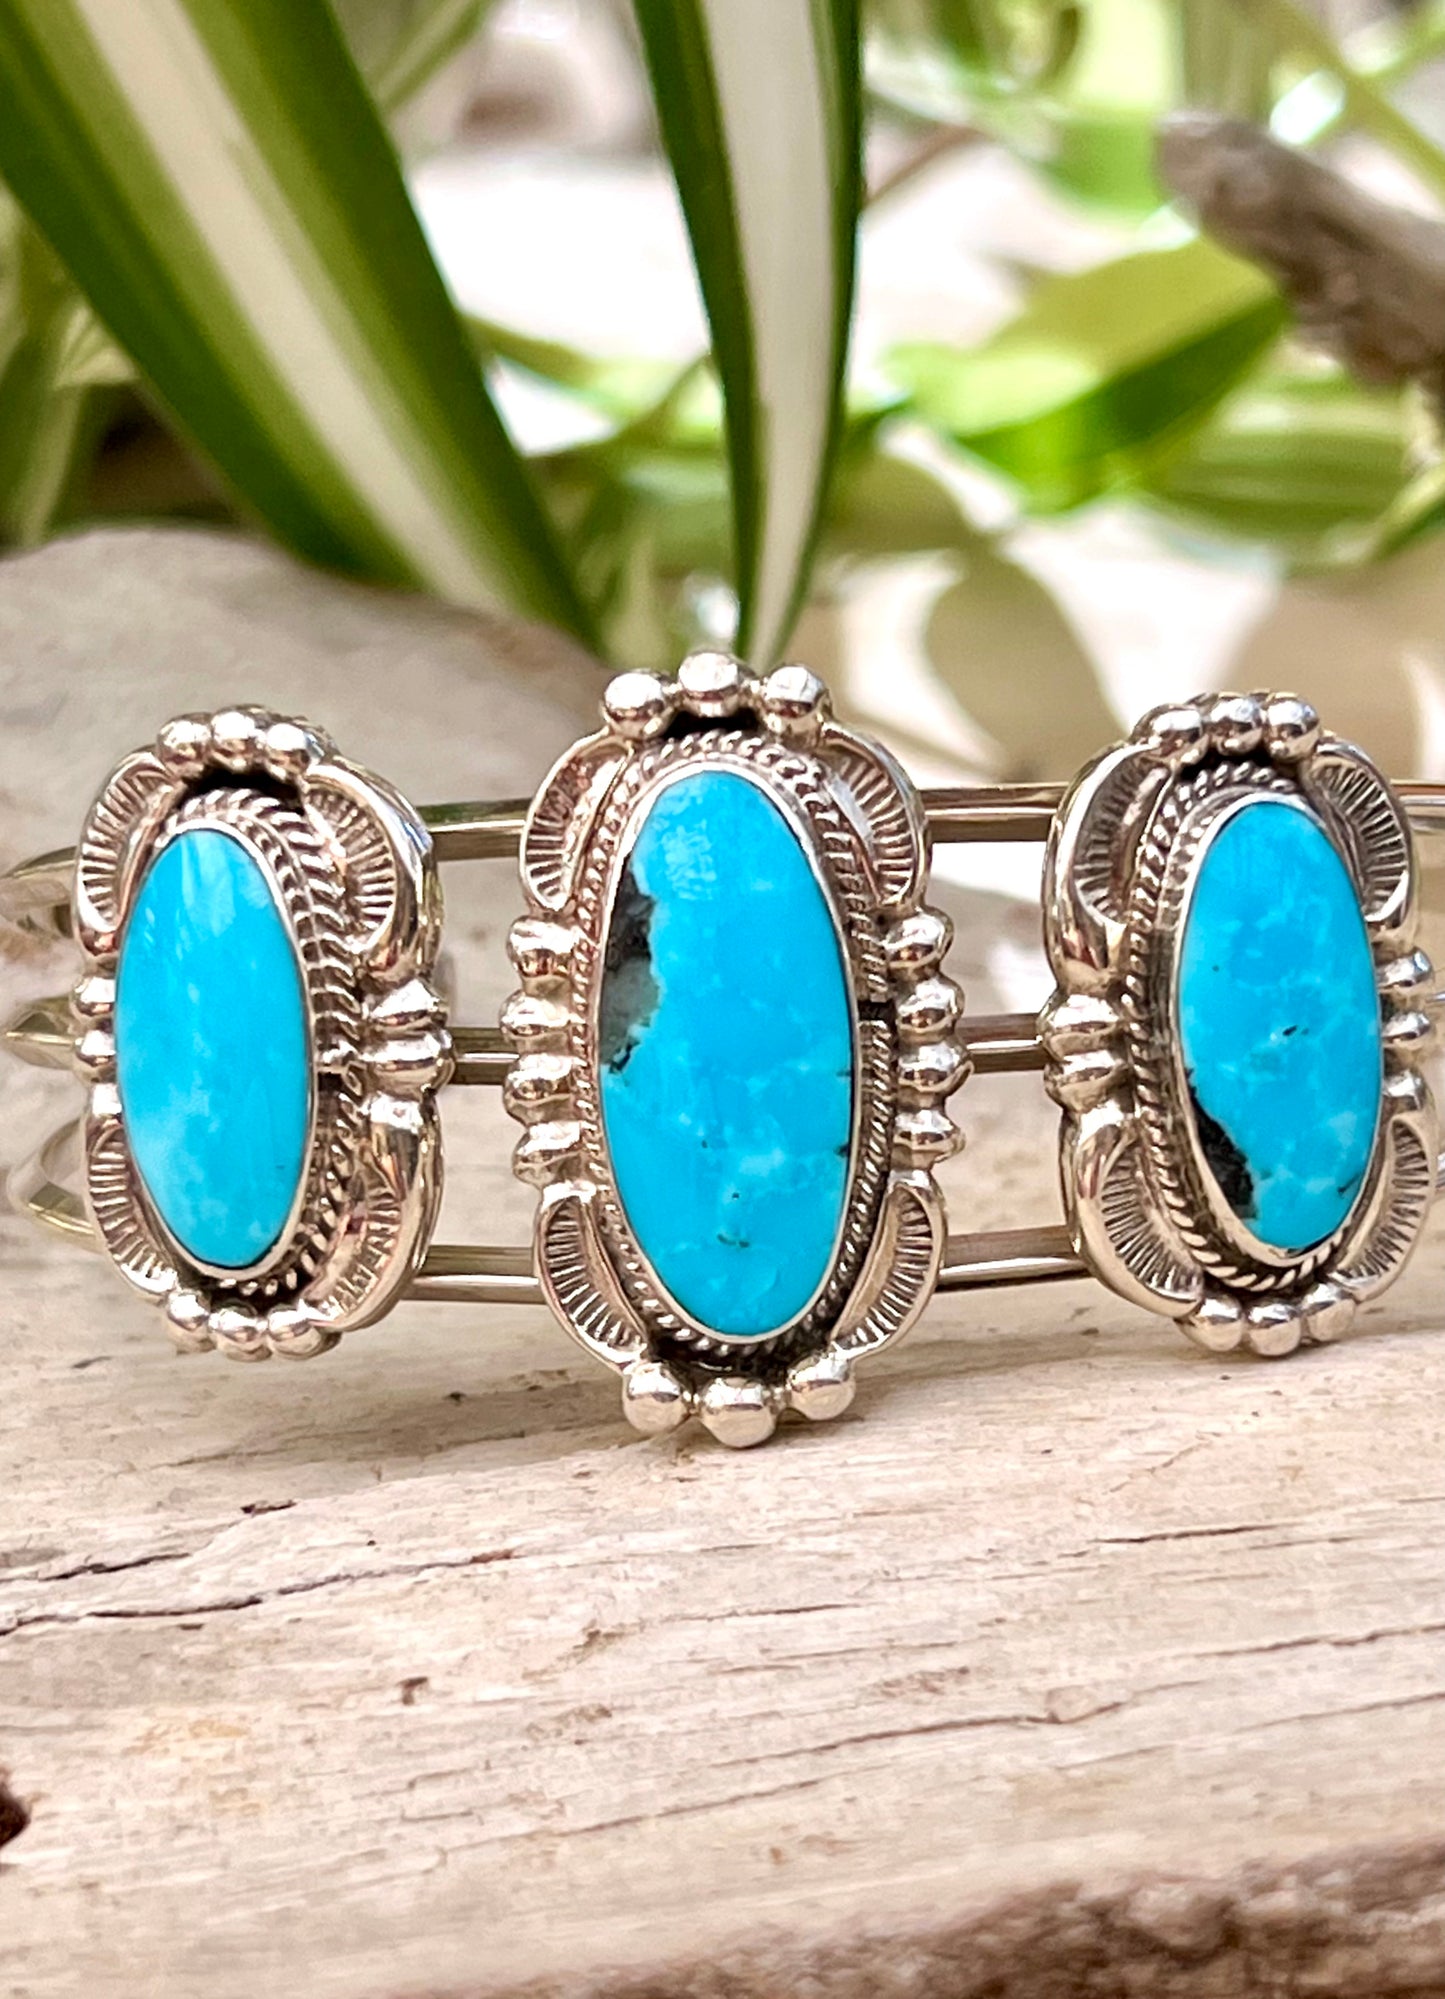 A stunning Super Silver Native American Cuff adorned with three turquoise stones, showcasing intricate silverwork.